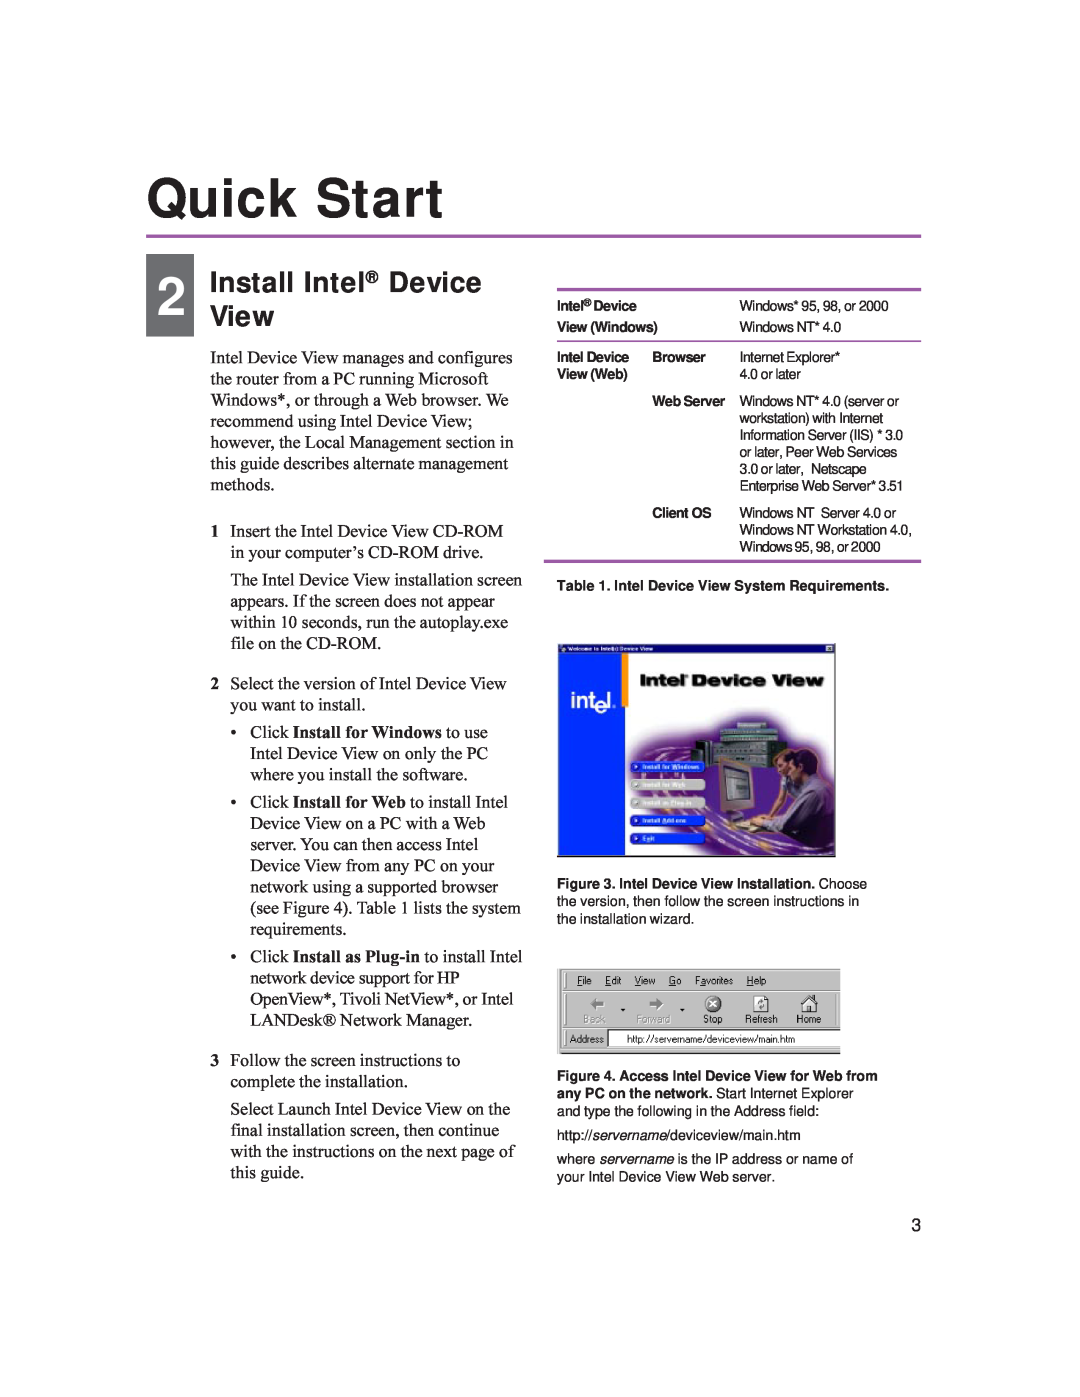 Intel 9545 Quick Start, InstallView Intel Device, View Windows, Intel Device Browser, View Web, Web Server, Client OS 